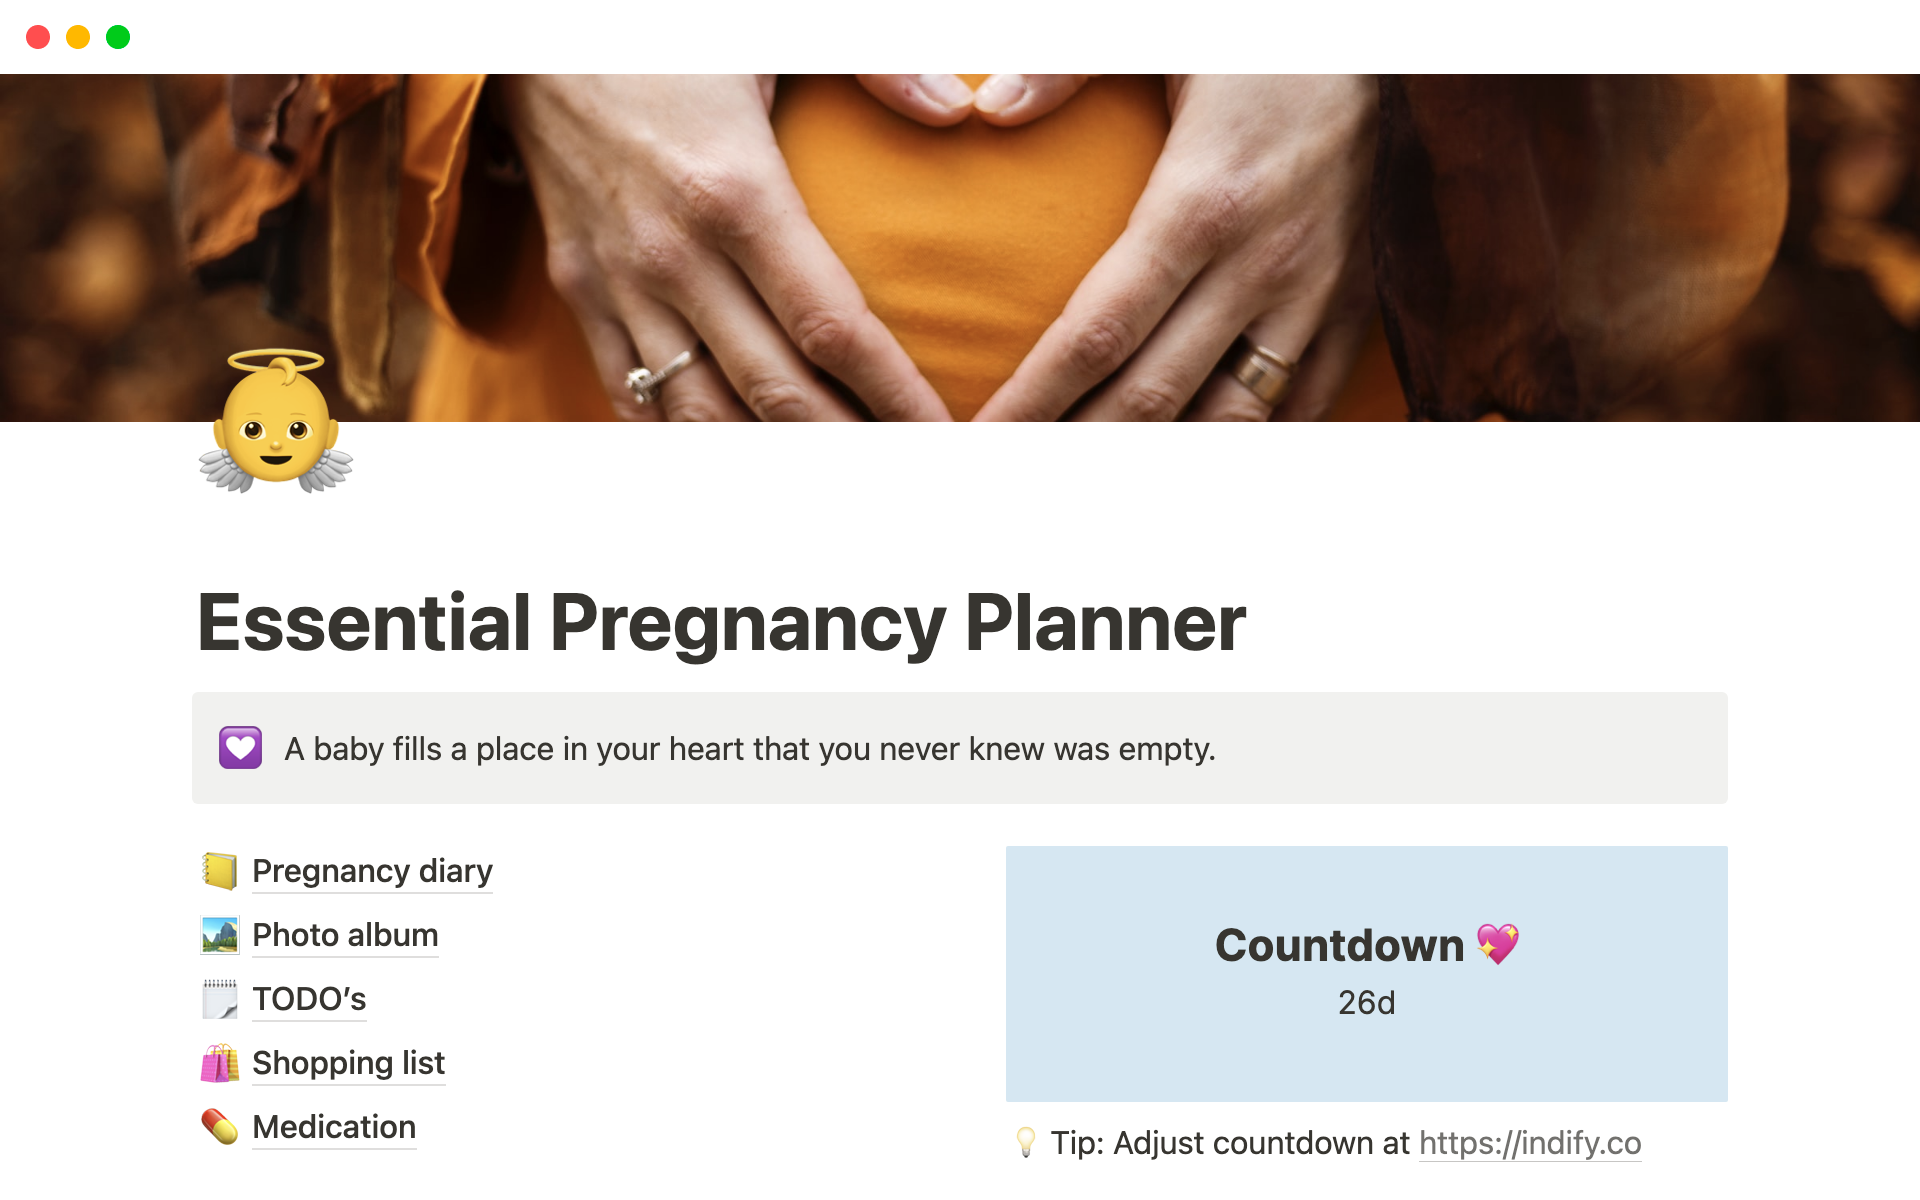 Stay organized and well-informed for a healthy pregnancy.